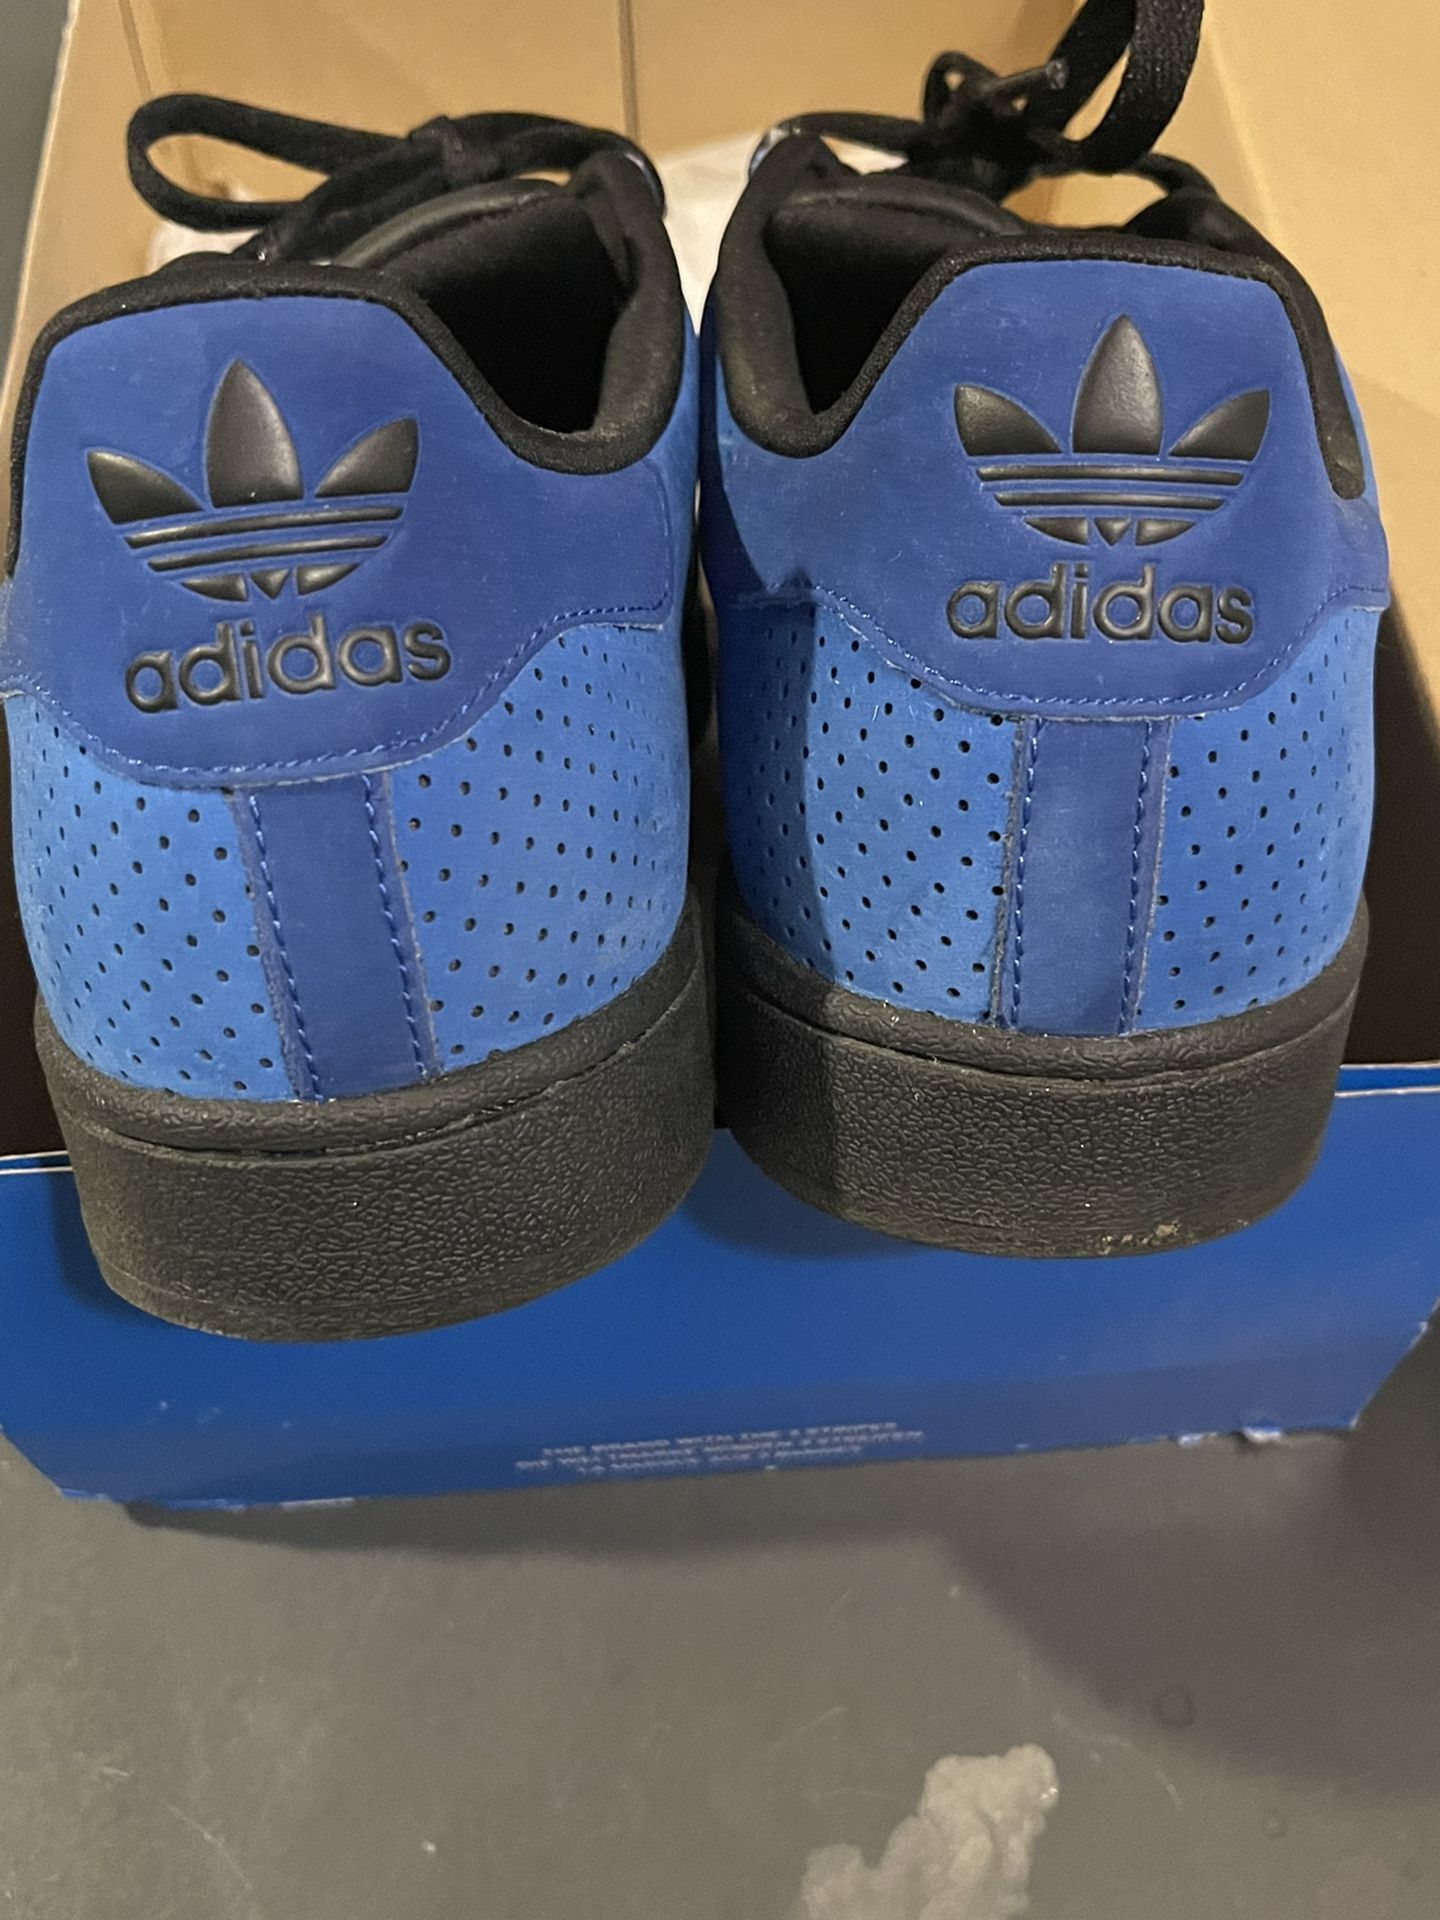 Adidas Superstar ll Blue And Black With Black Stripes, 10.5